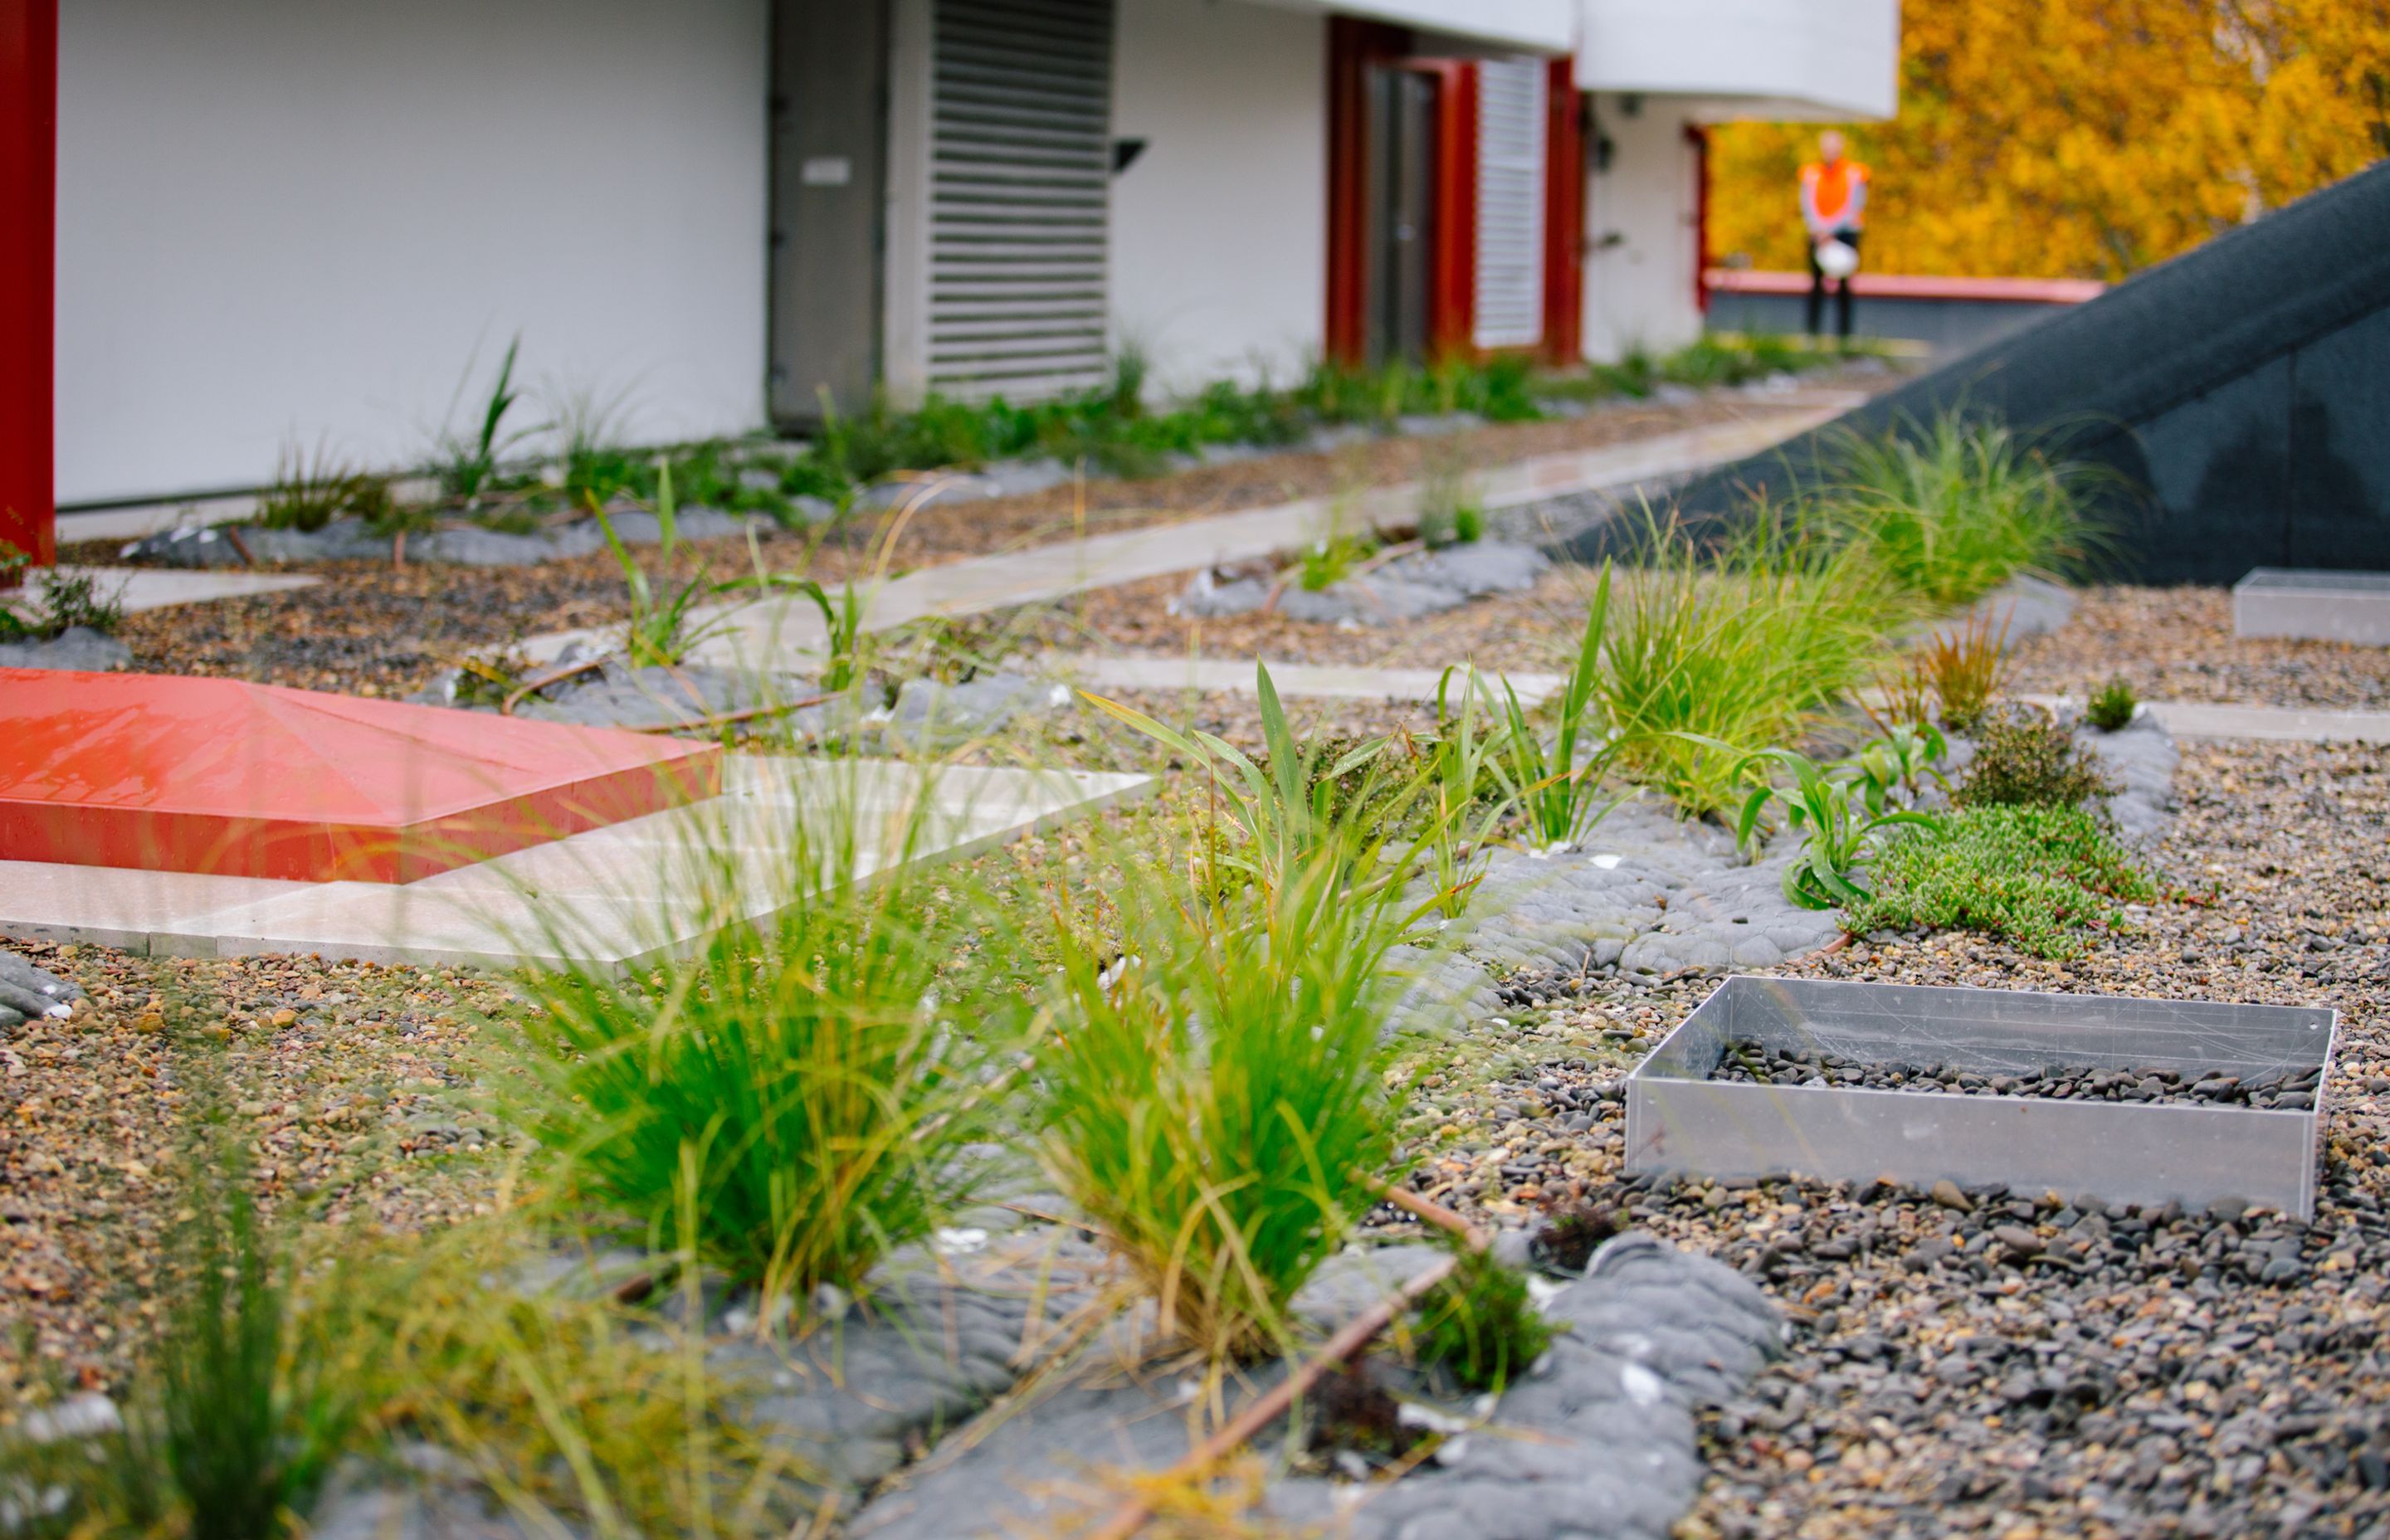 The green roof provides many benefits to the surrounding ecosystem.